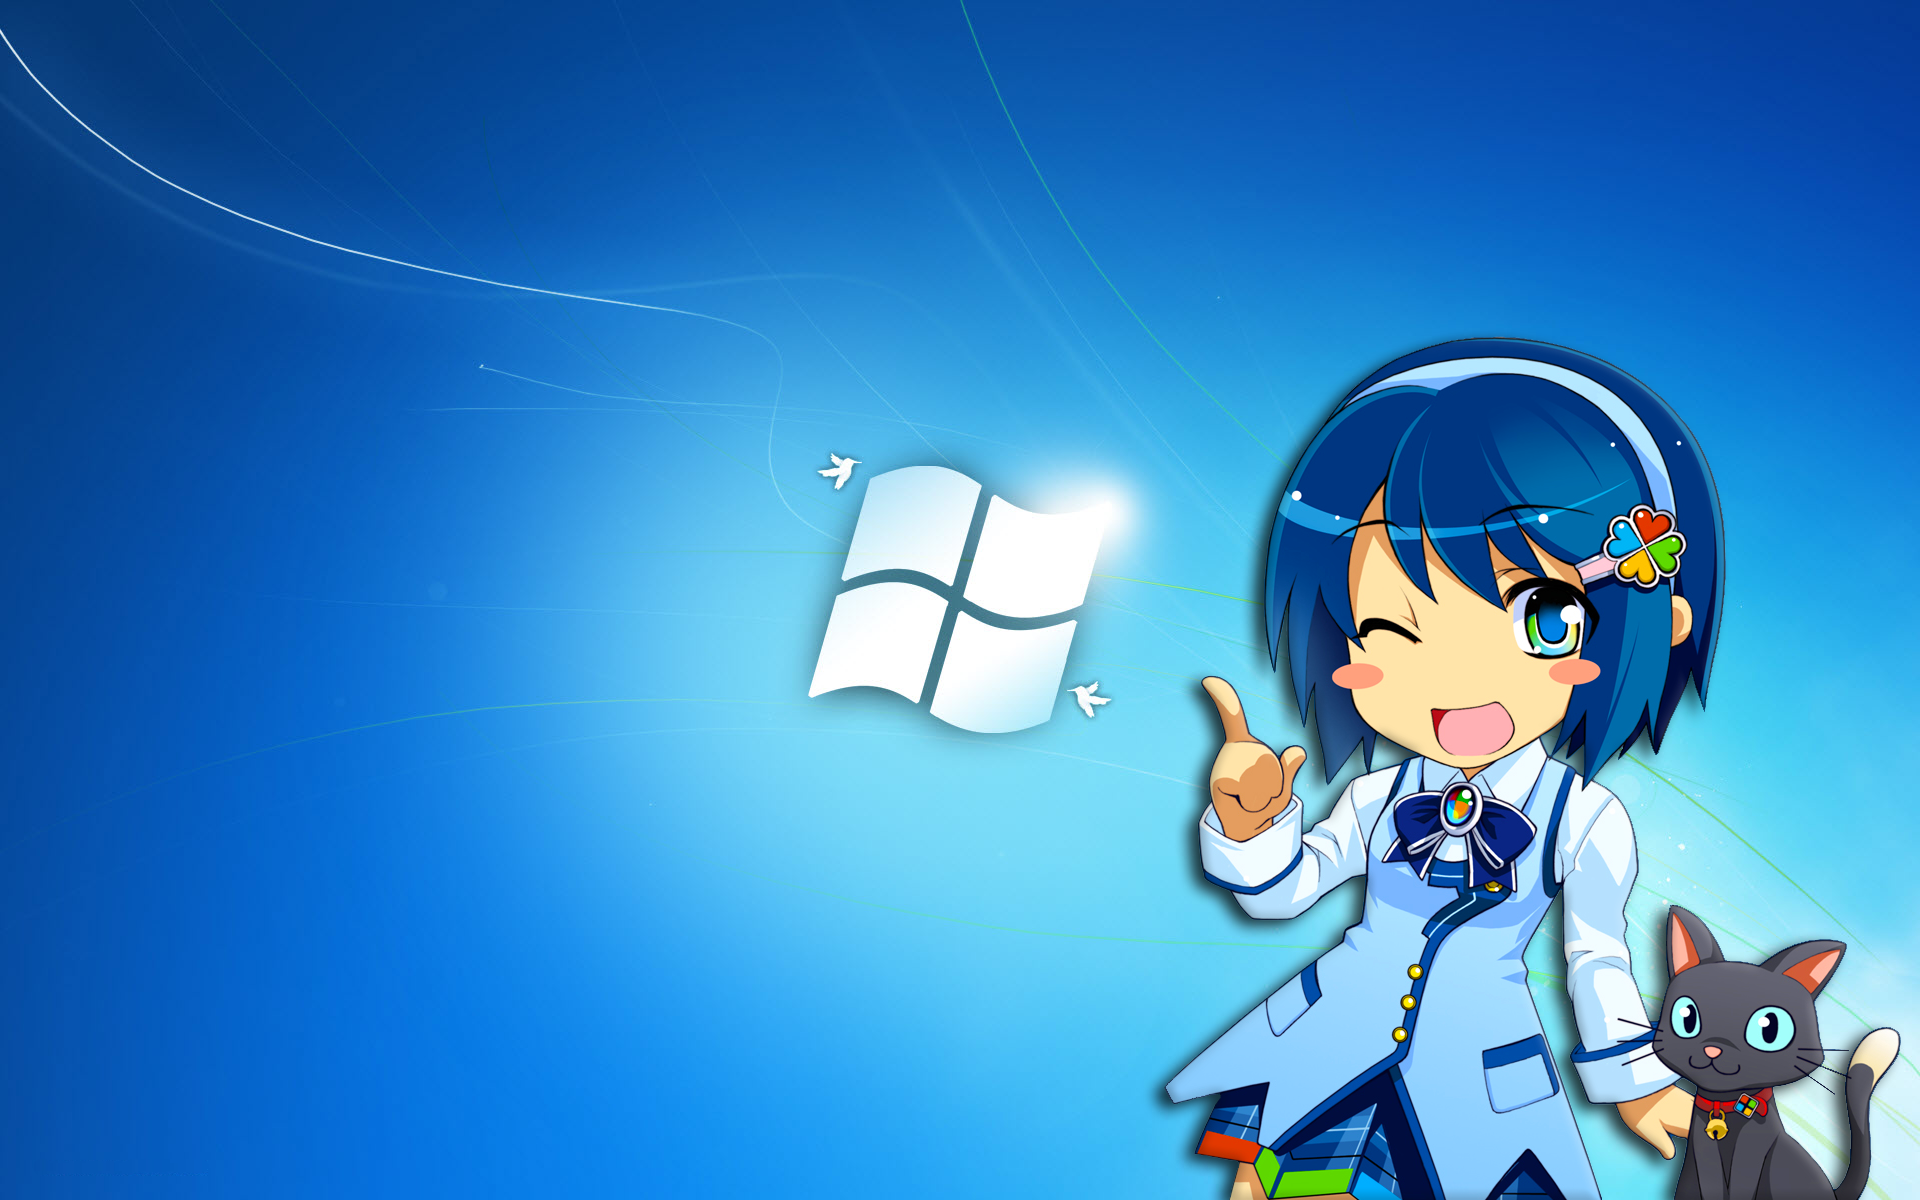 Windows 10 Wallpaper Anime, mywallpapers site